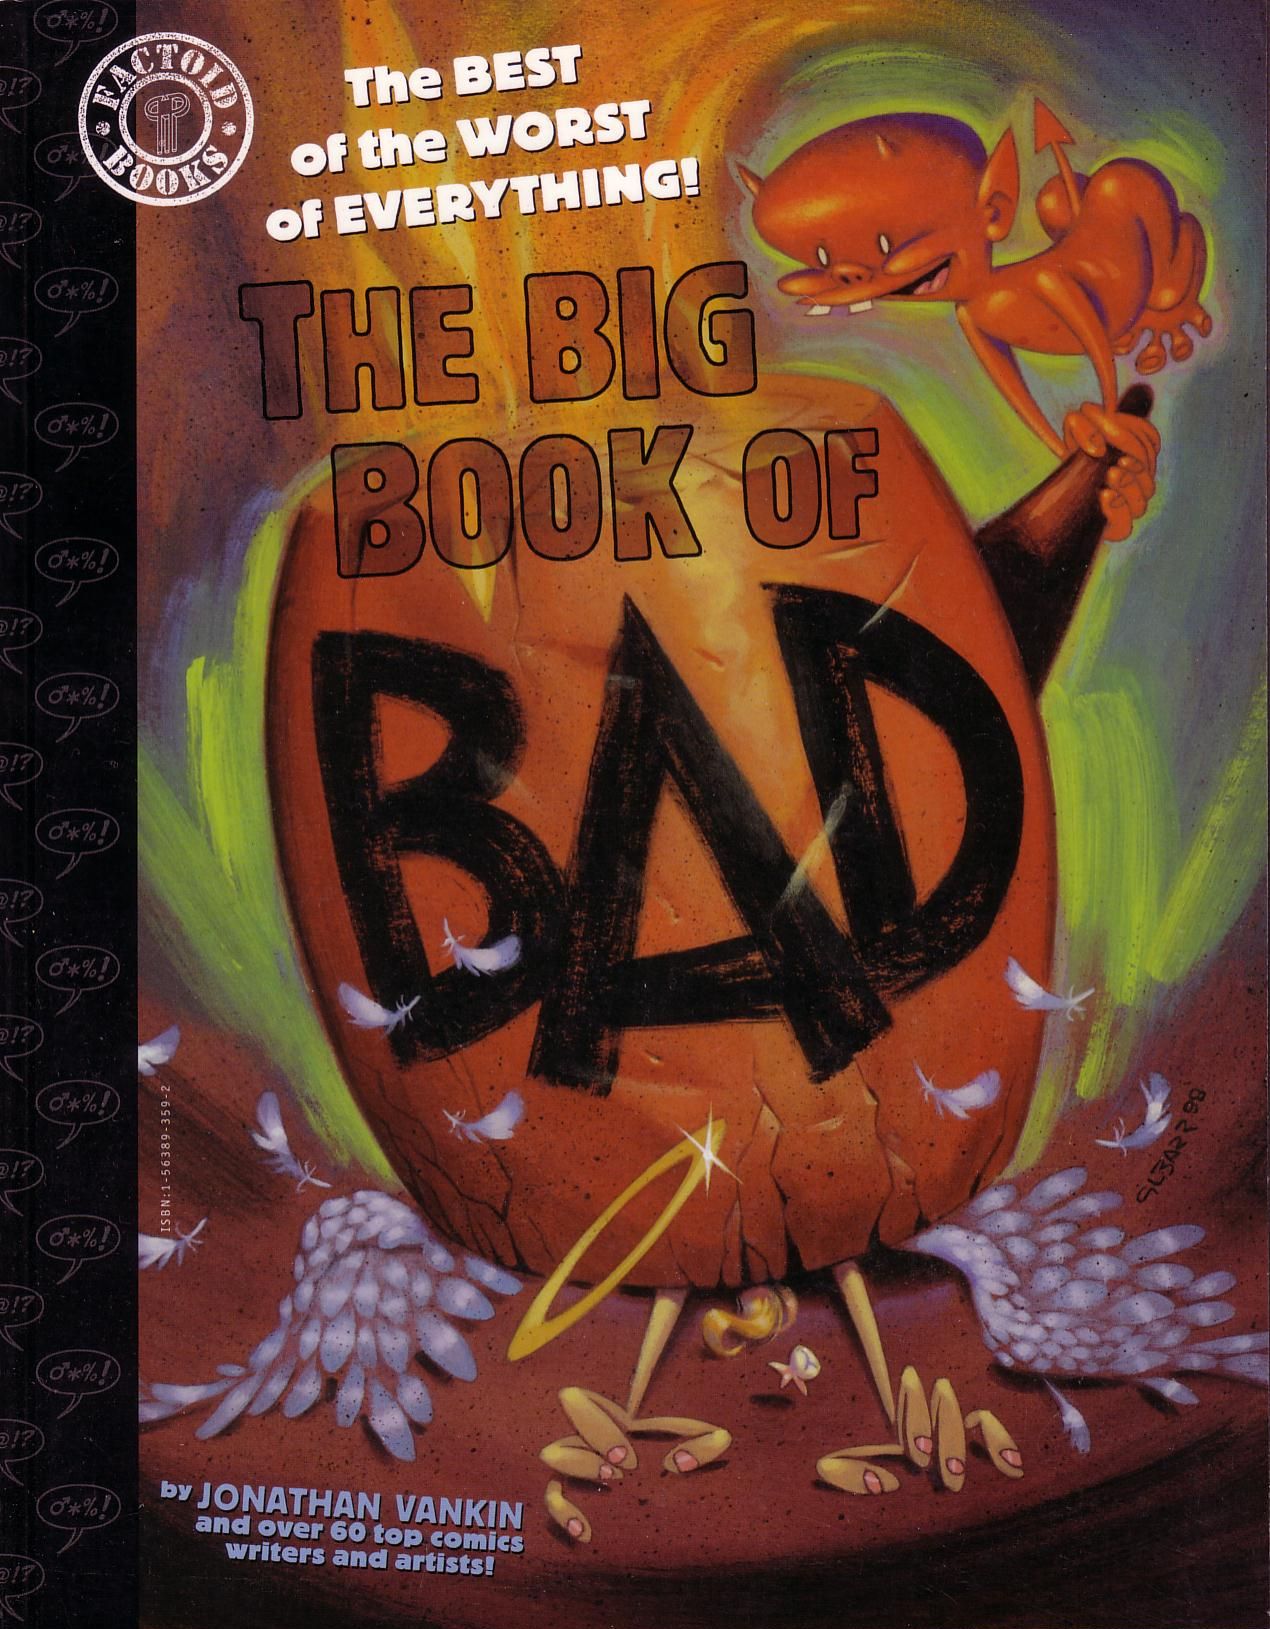 Read online The Big Book of... comic -  Issue # TPB Bad - 1